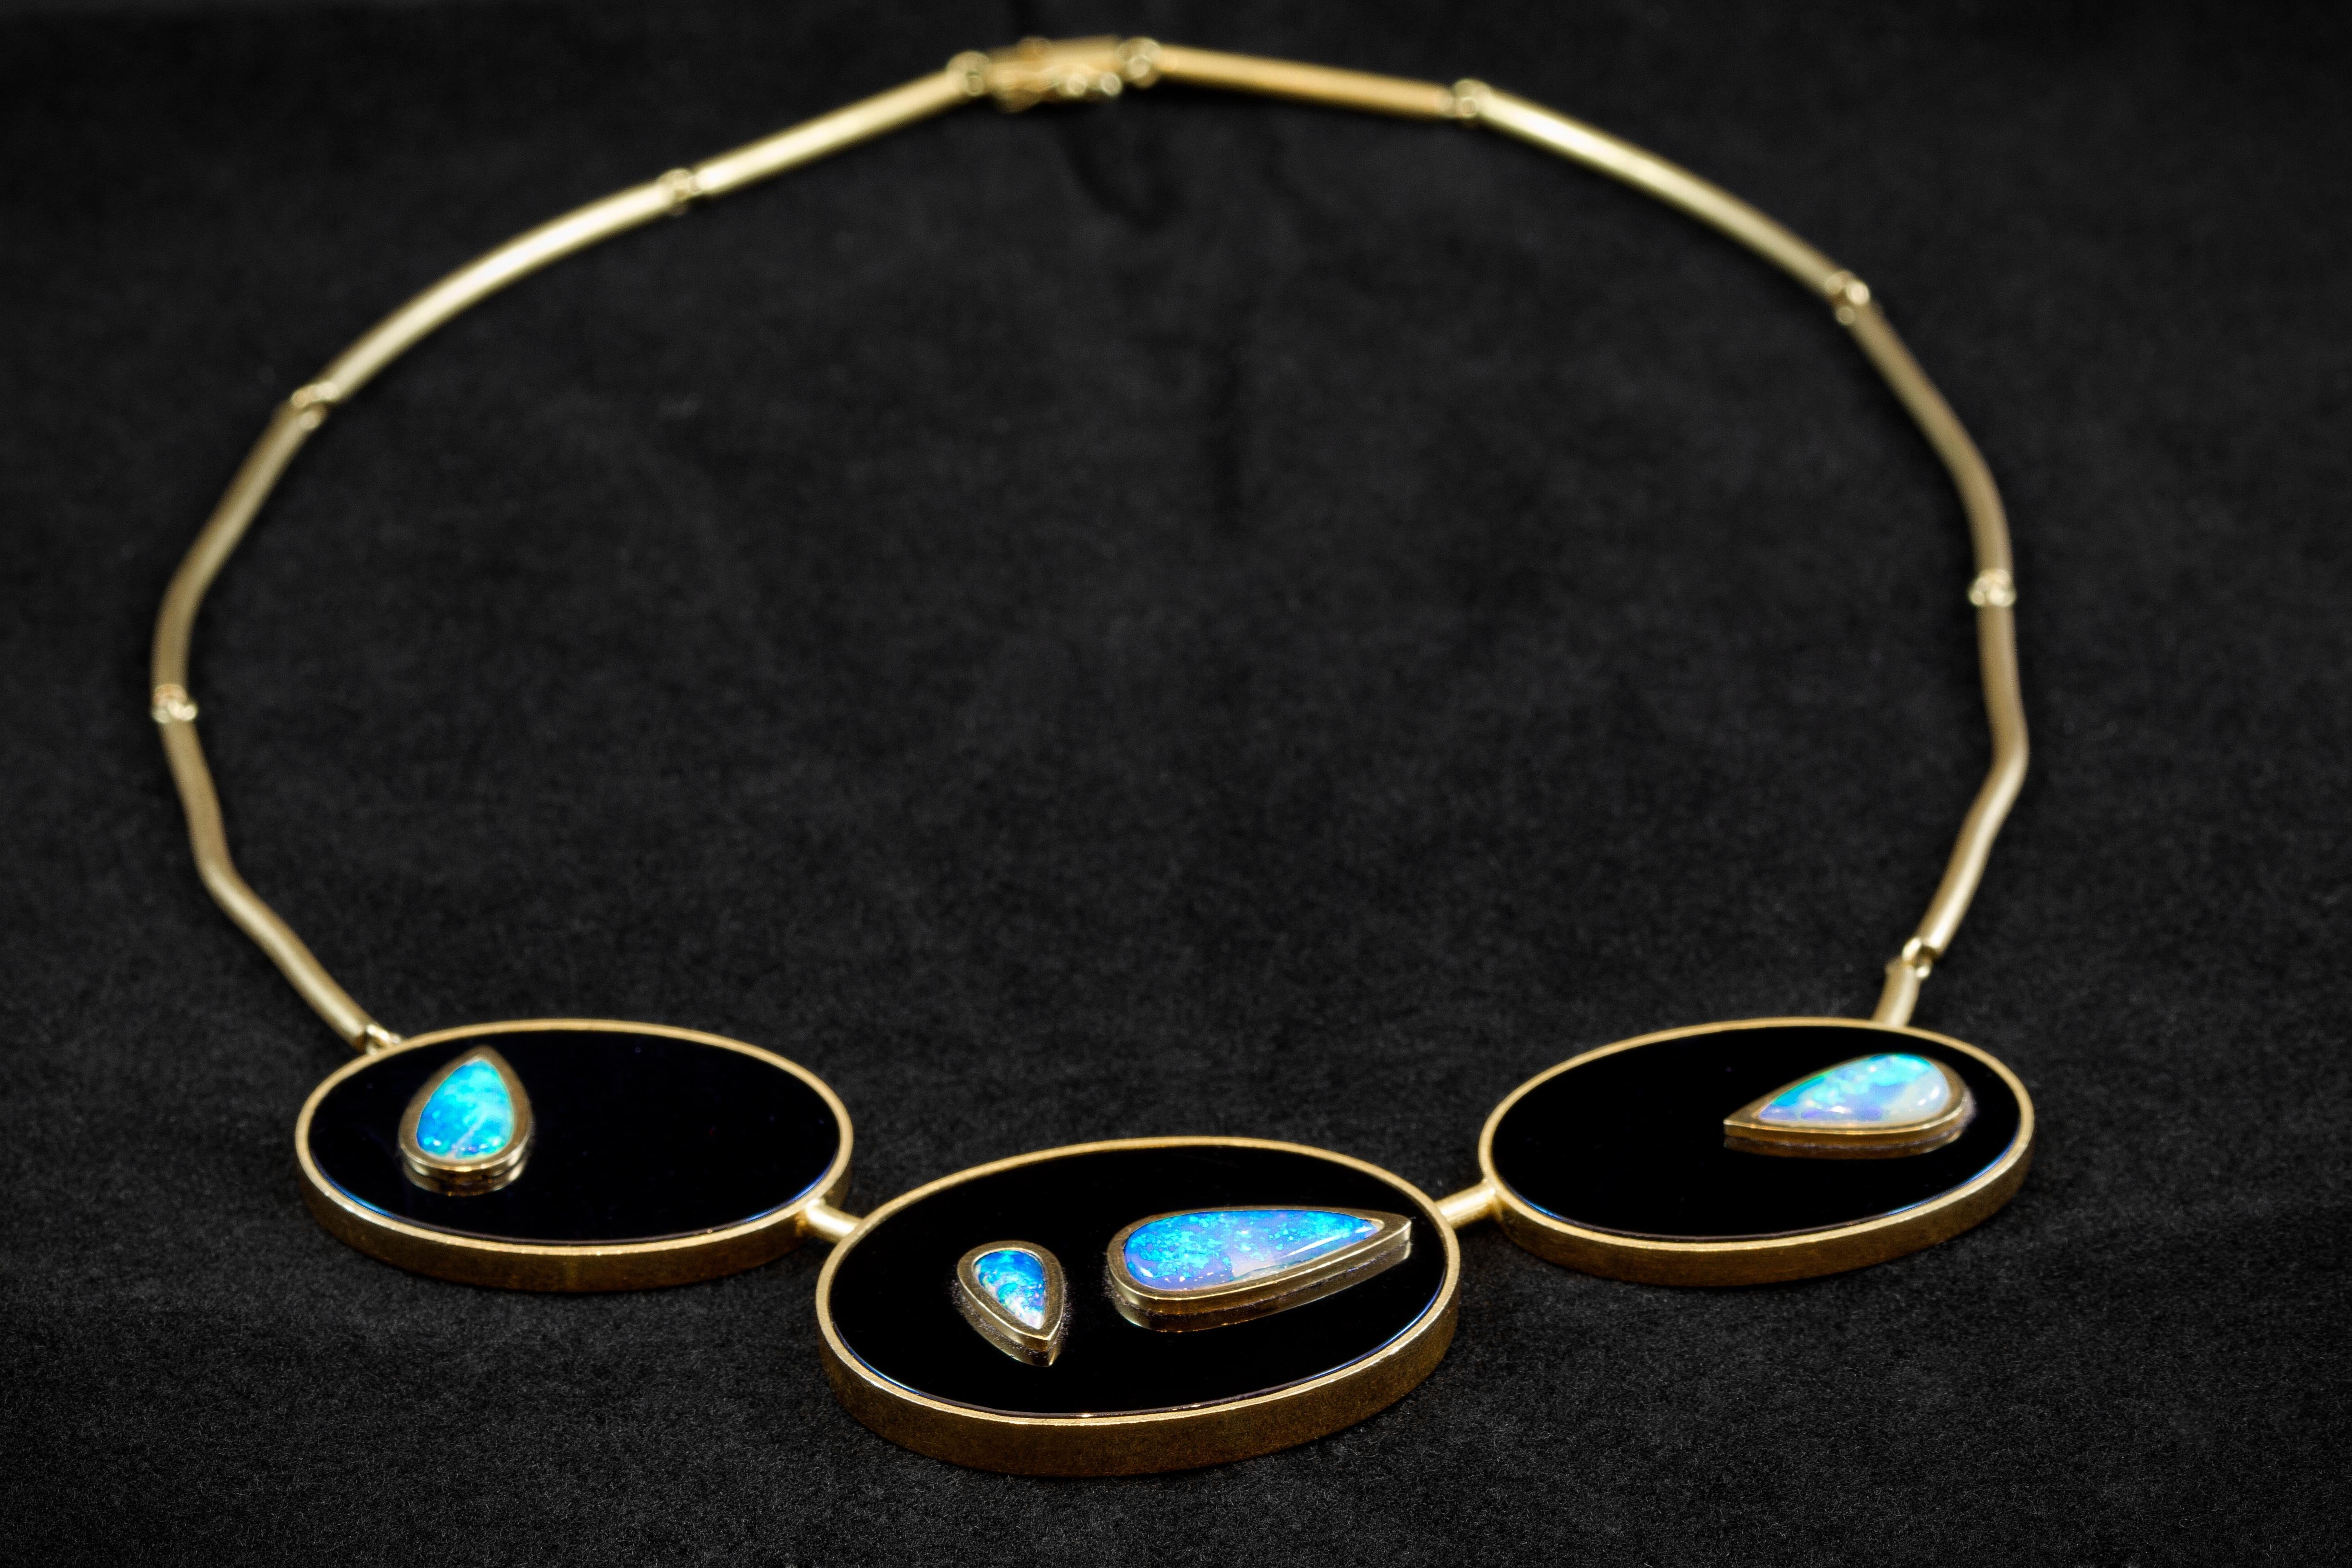 This necklace is handmade in 18k yellow gold with 3 pieces of onyx and 4 classic Australian opals.
The gold pieces around the neck are articulated and the gold clasp has a double security system.
